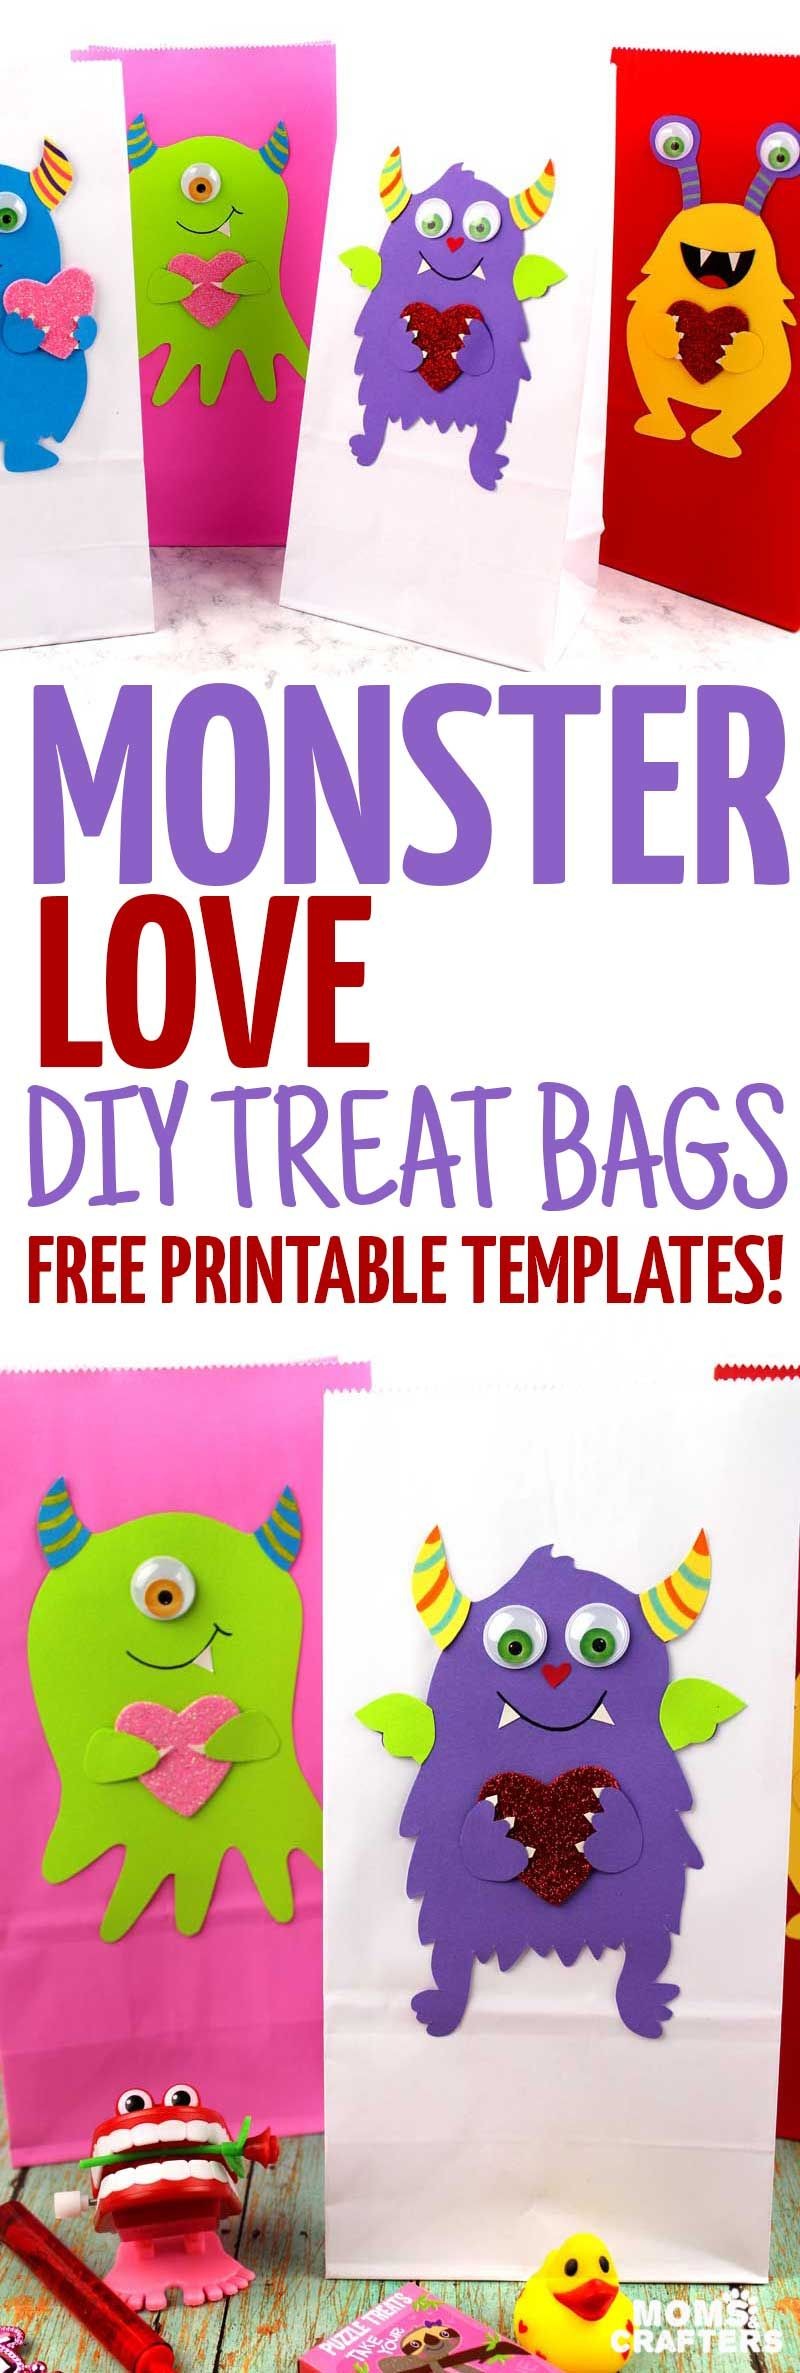 Papercraft Monsters Make these Adorable Monster Love Treat Bags